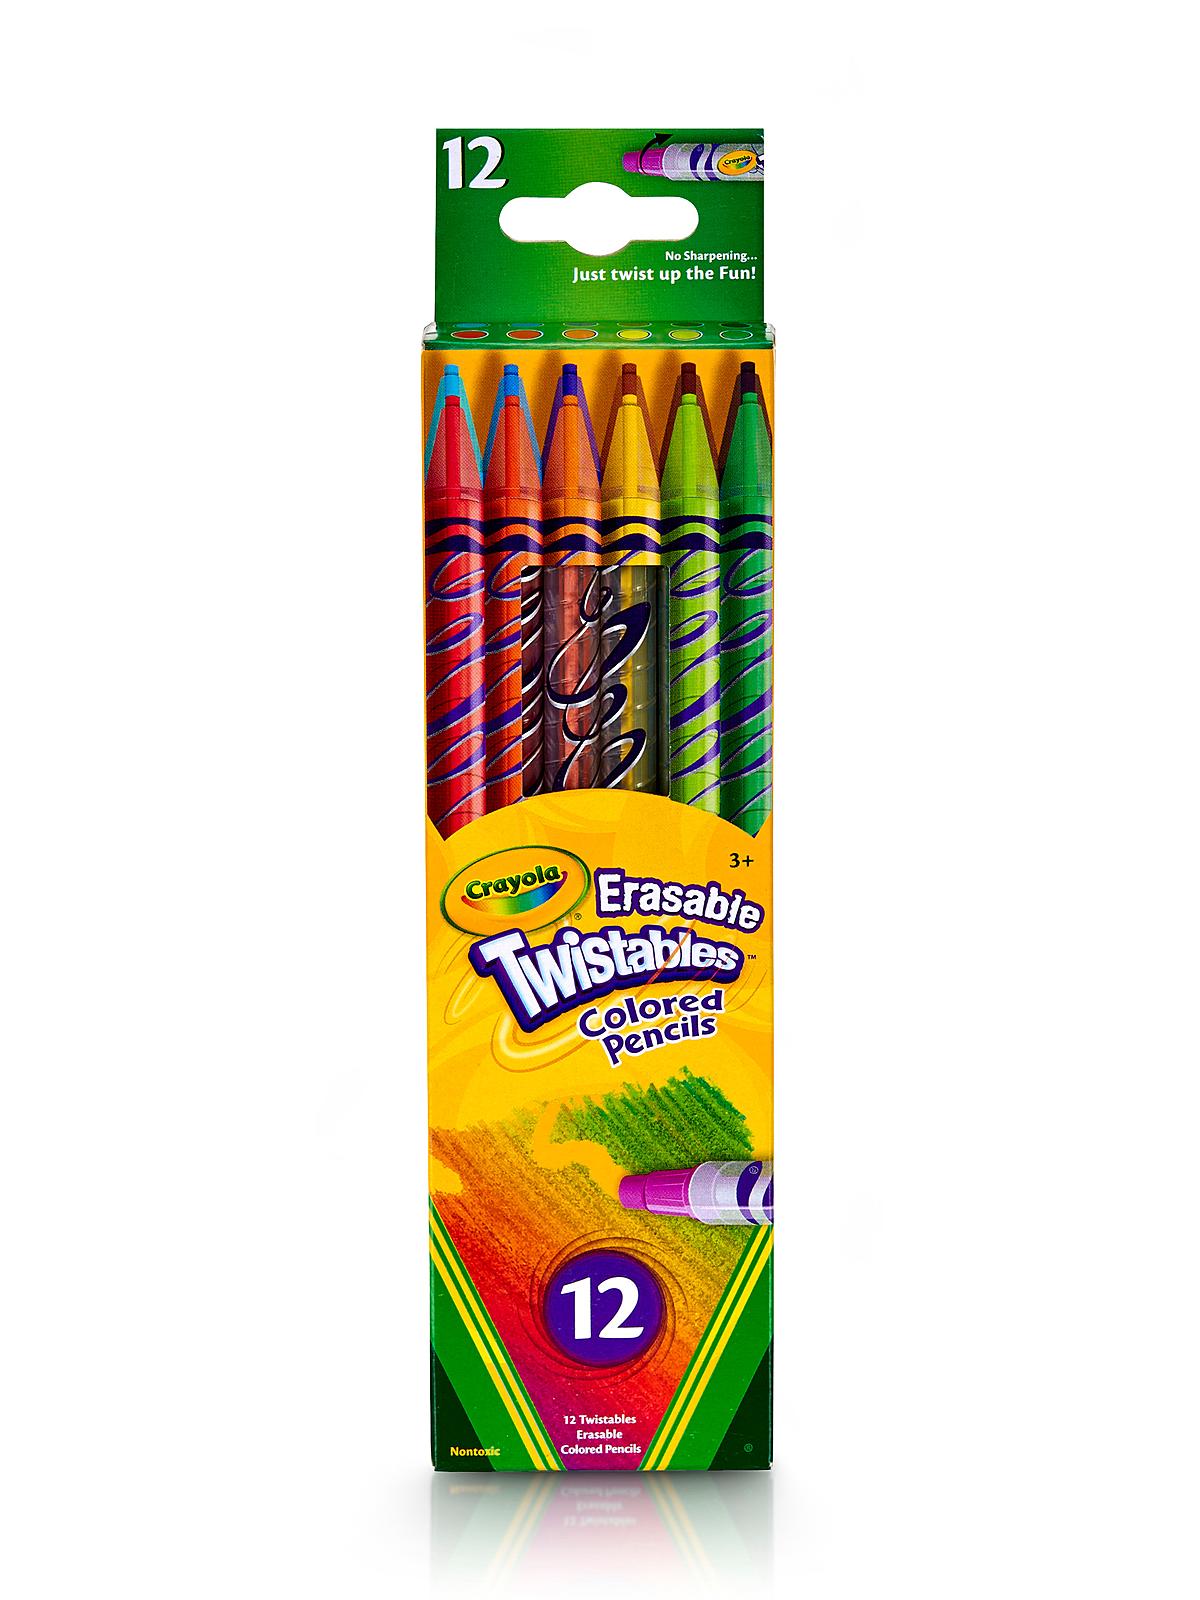 Erasable Twistables Colored Pencils pack of 12